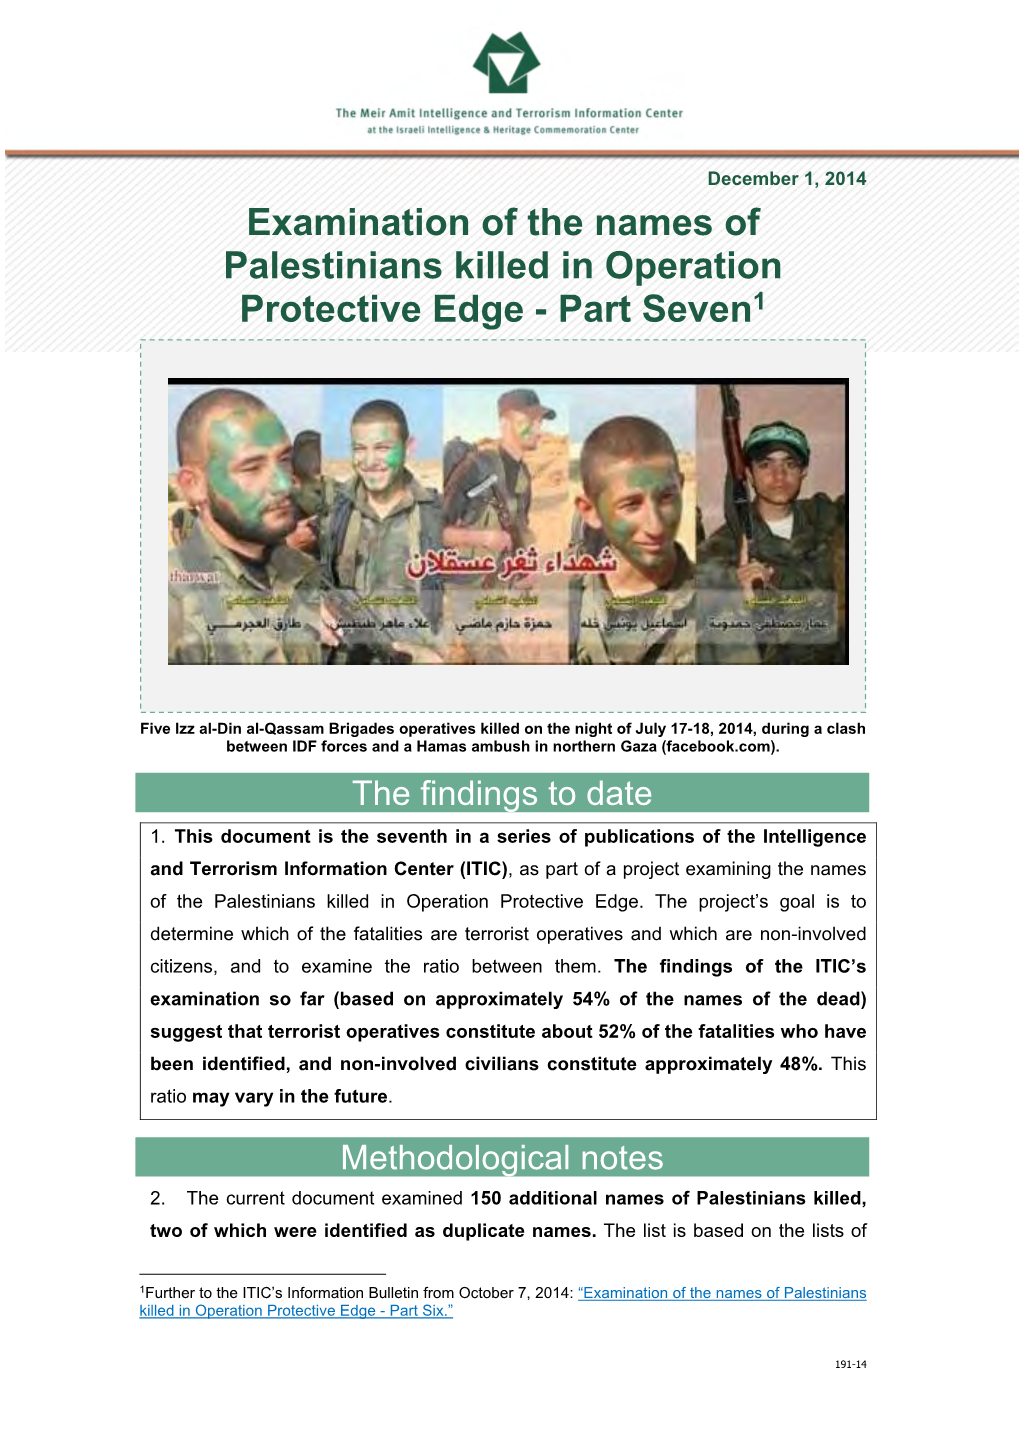 Examination of the Names of Palestinians Killed in Operation Protective Edge - Part Seven1